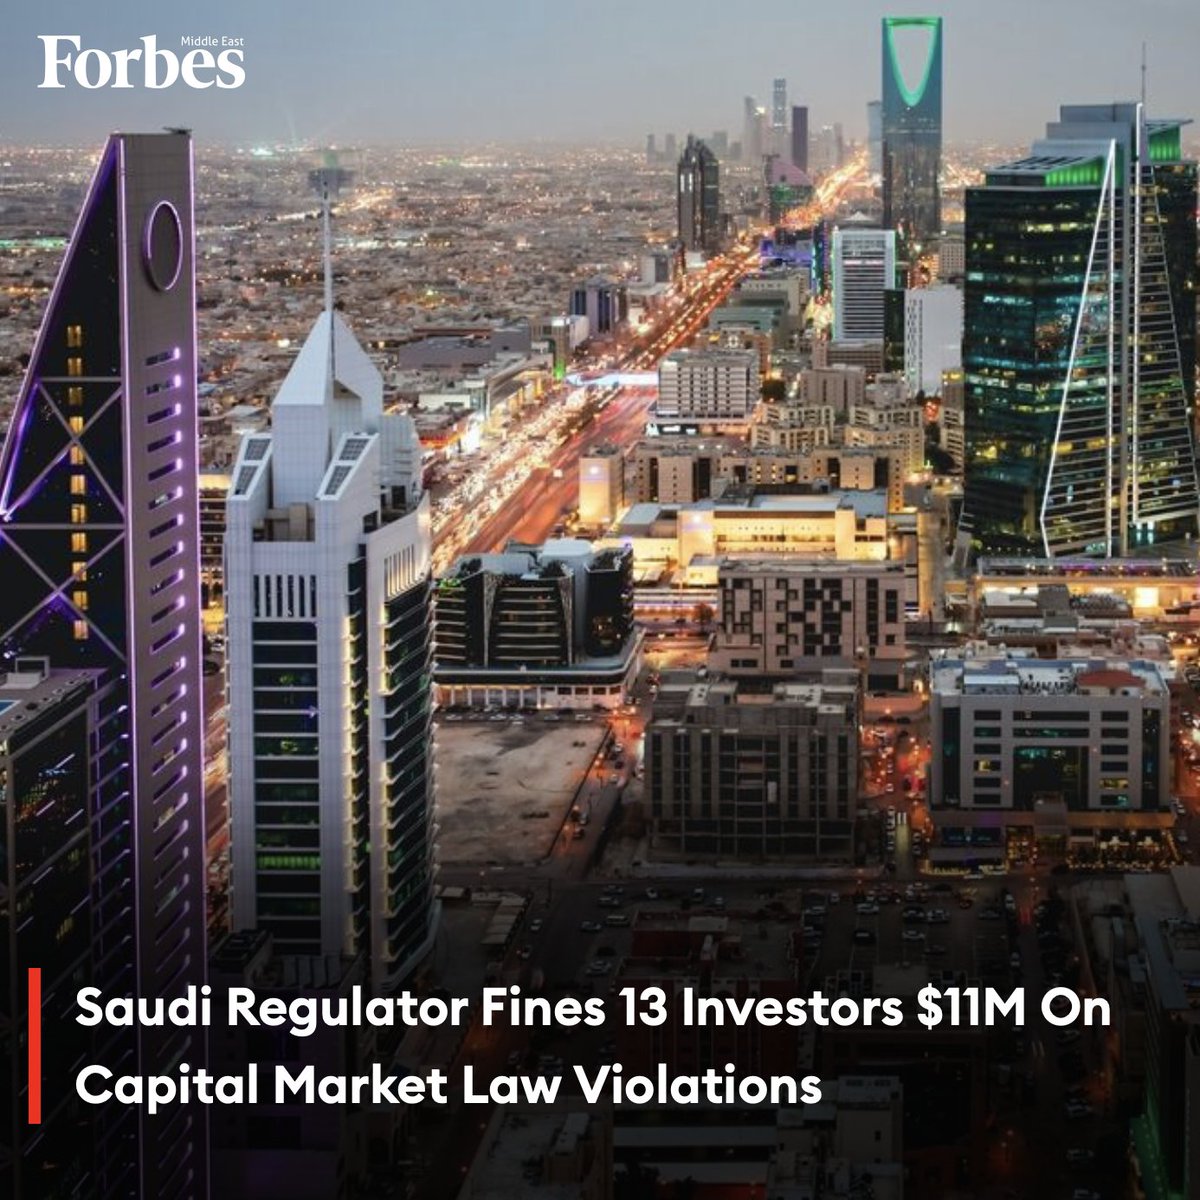 The Saudi Capital Markets Authority has convicted 13 investors of violating the Capital Markets Law and relevant regulations while ordering them and other investors to pay $11.4 million (AED 42.9 million) in fines. #Forbes #Saudi For more details: 🔗 on.forbesmiddleeast.com/0tlv